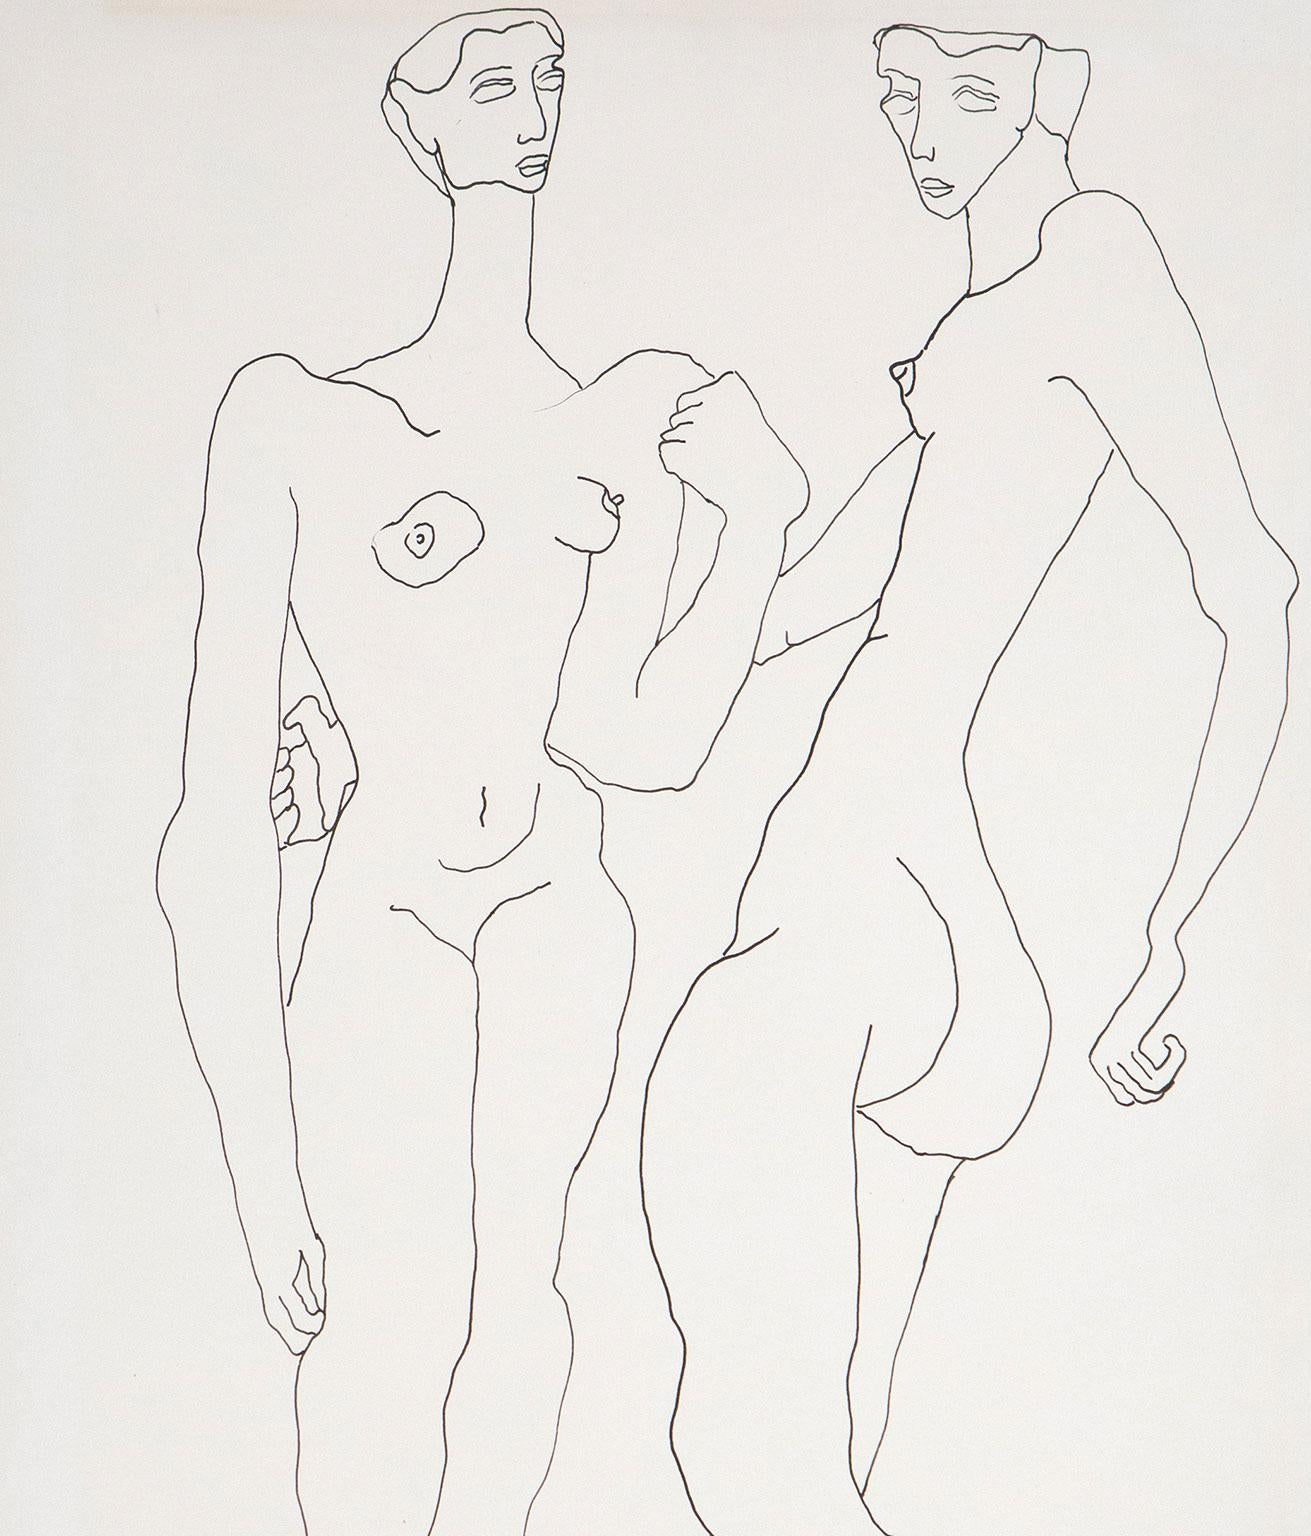 Two Nudes, USA, circa 1930s  Signed in ink by the artist  Pen and ink on paper - Modern Art by Louise Nevelson